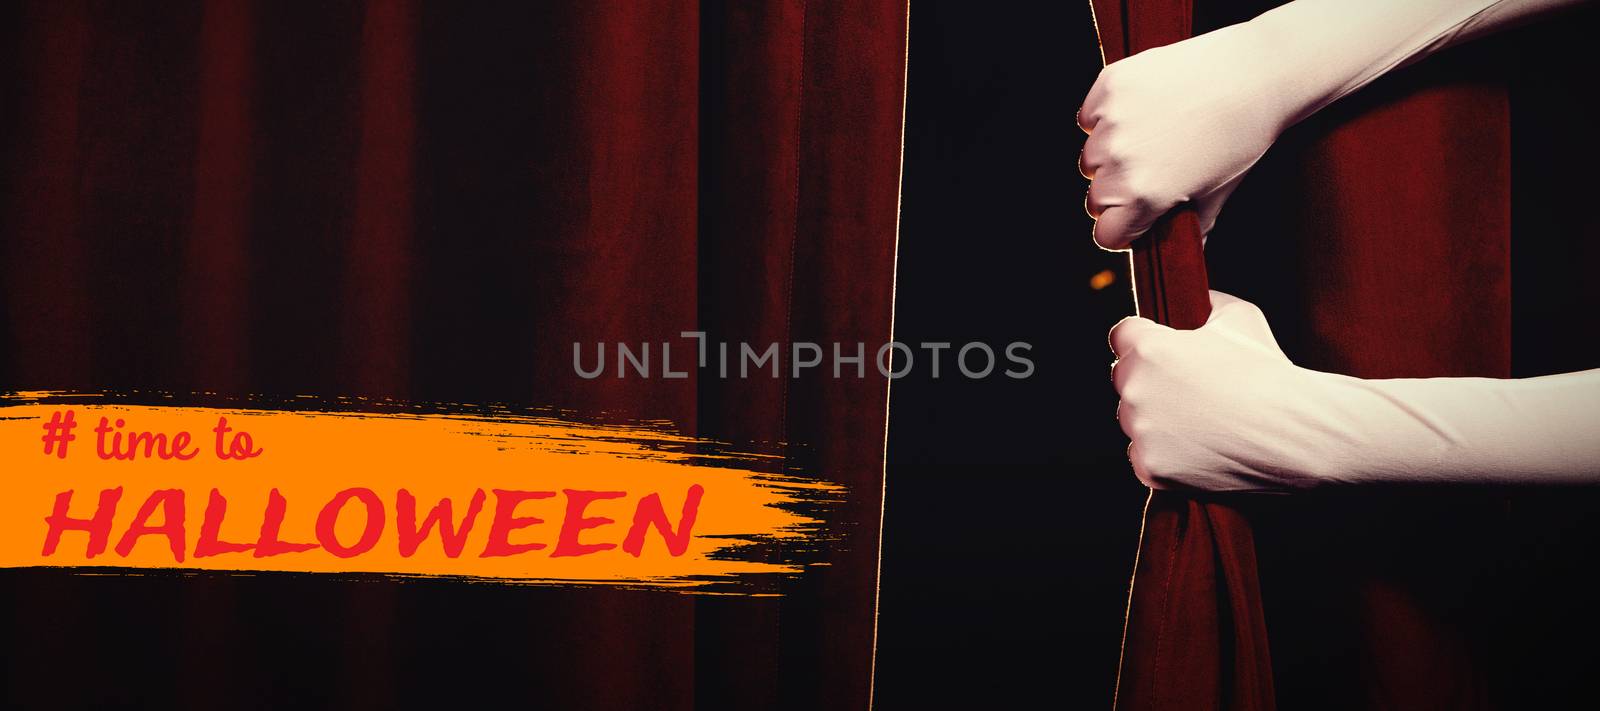 Composite image of graphic image of time to halloween text by Wavebreakmedia